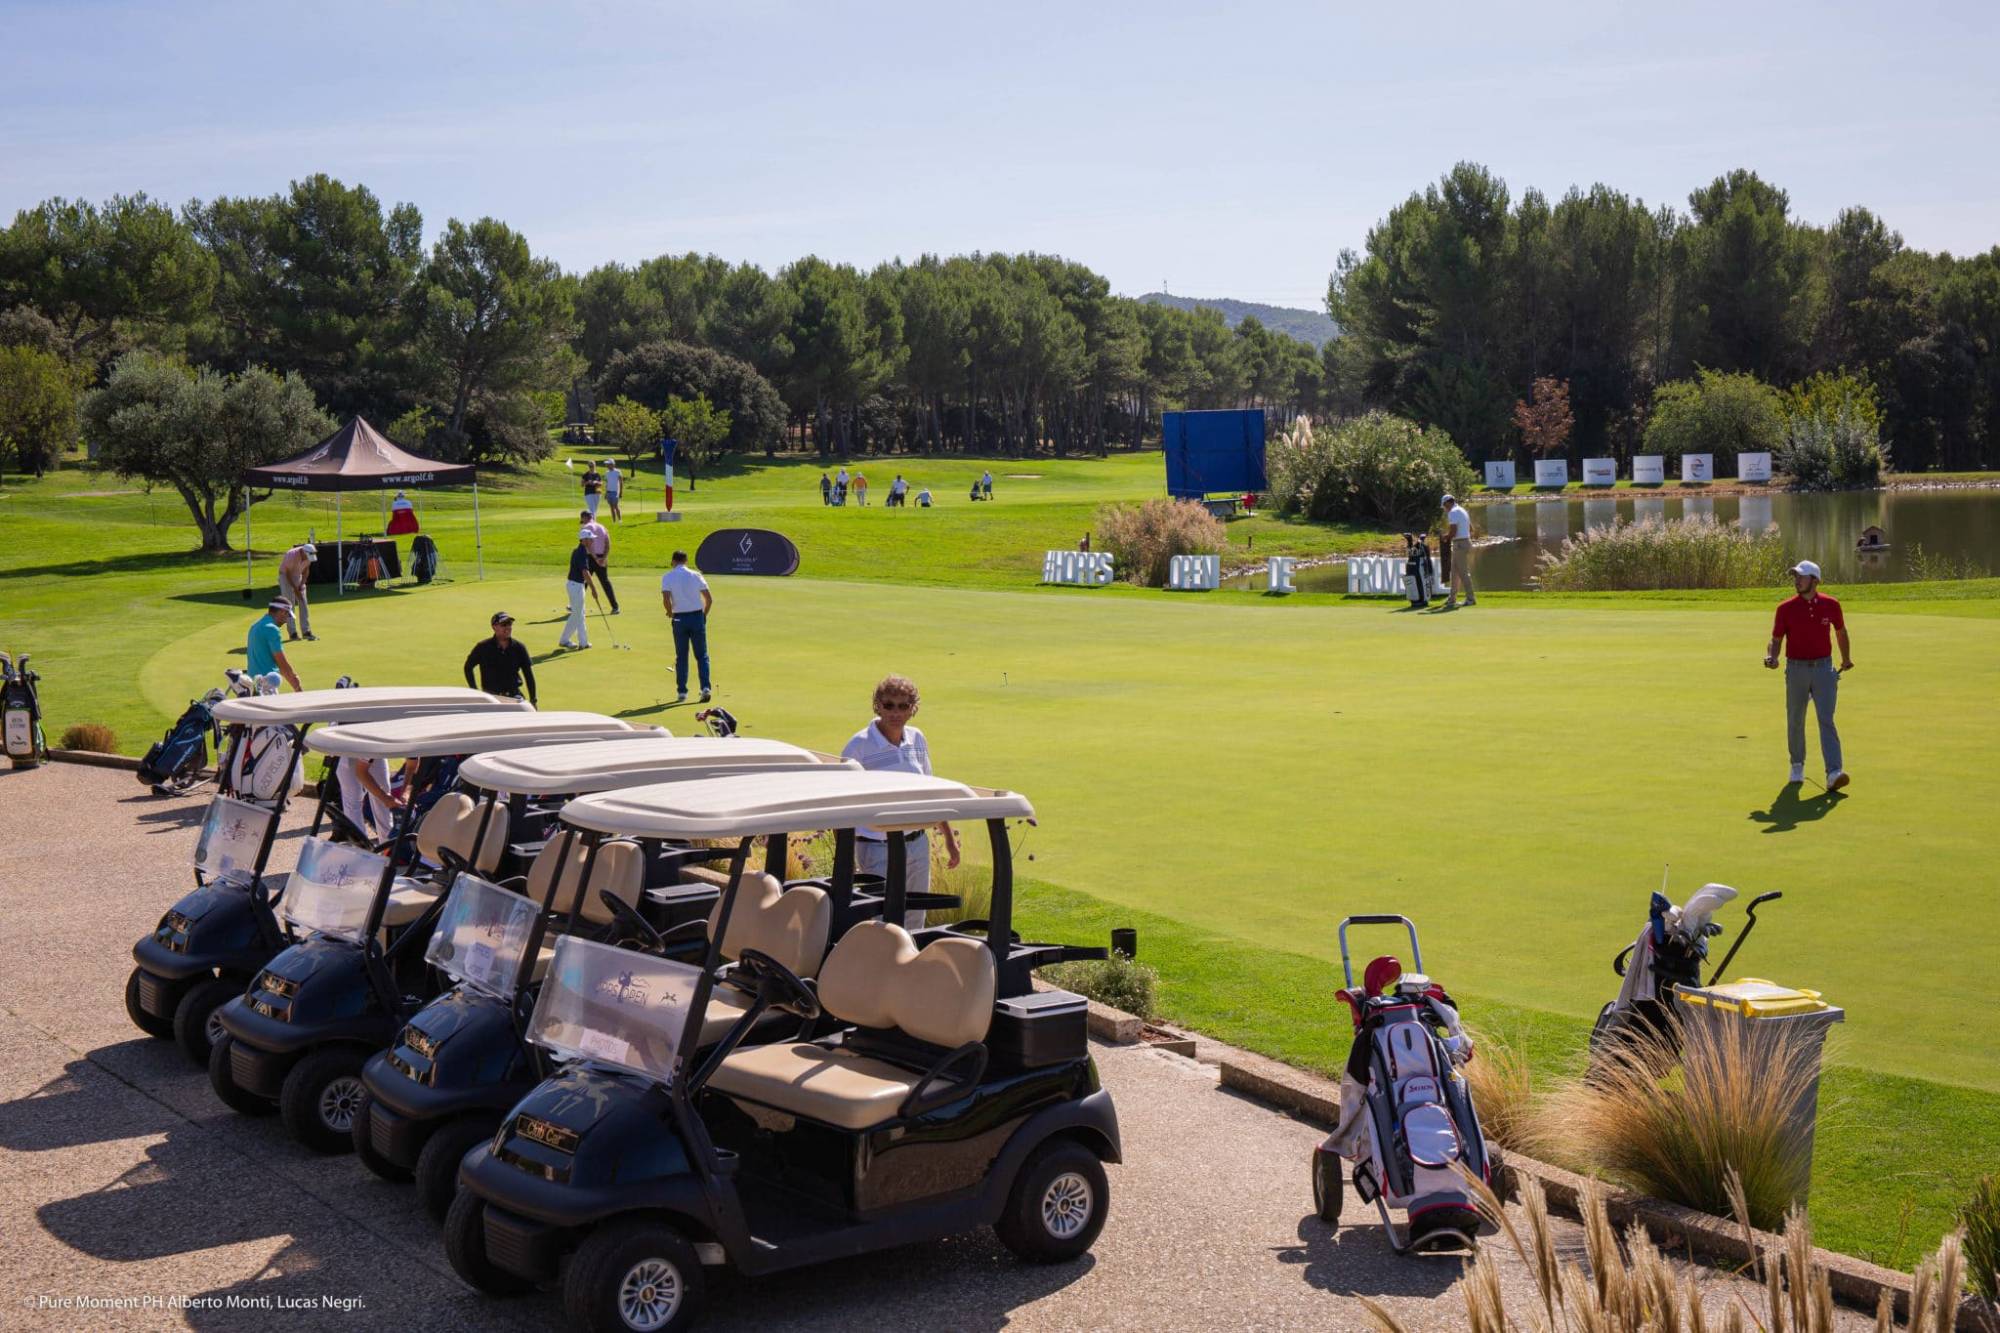 HOPPS OPEN DE PROVENCE 2021: Attend the biggest professional golf tournament in Provence at Pont Royal!